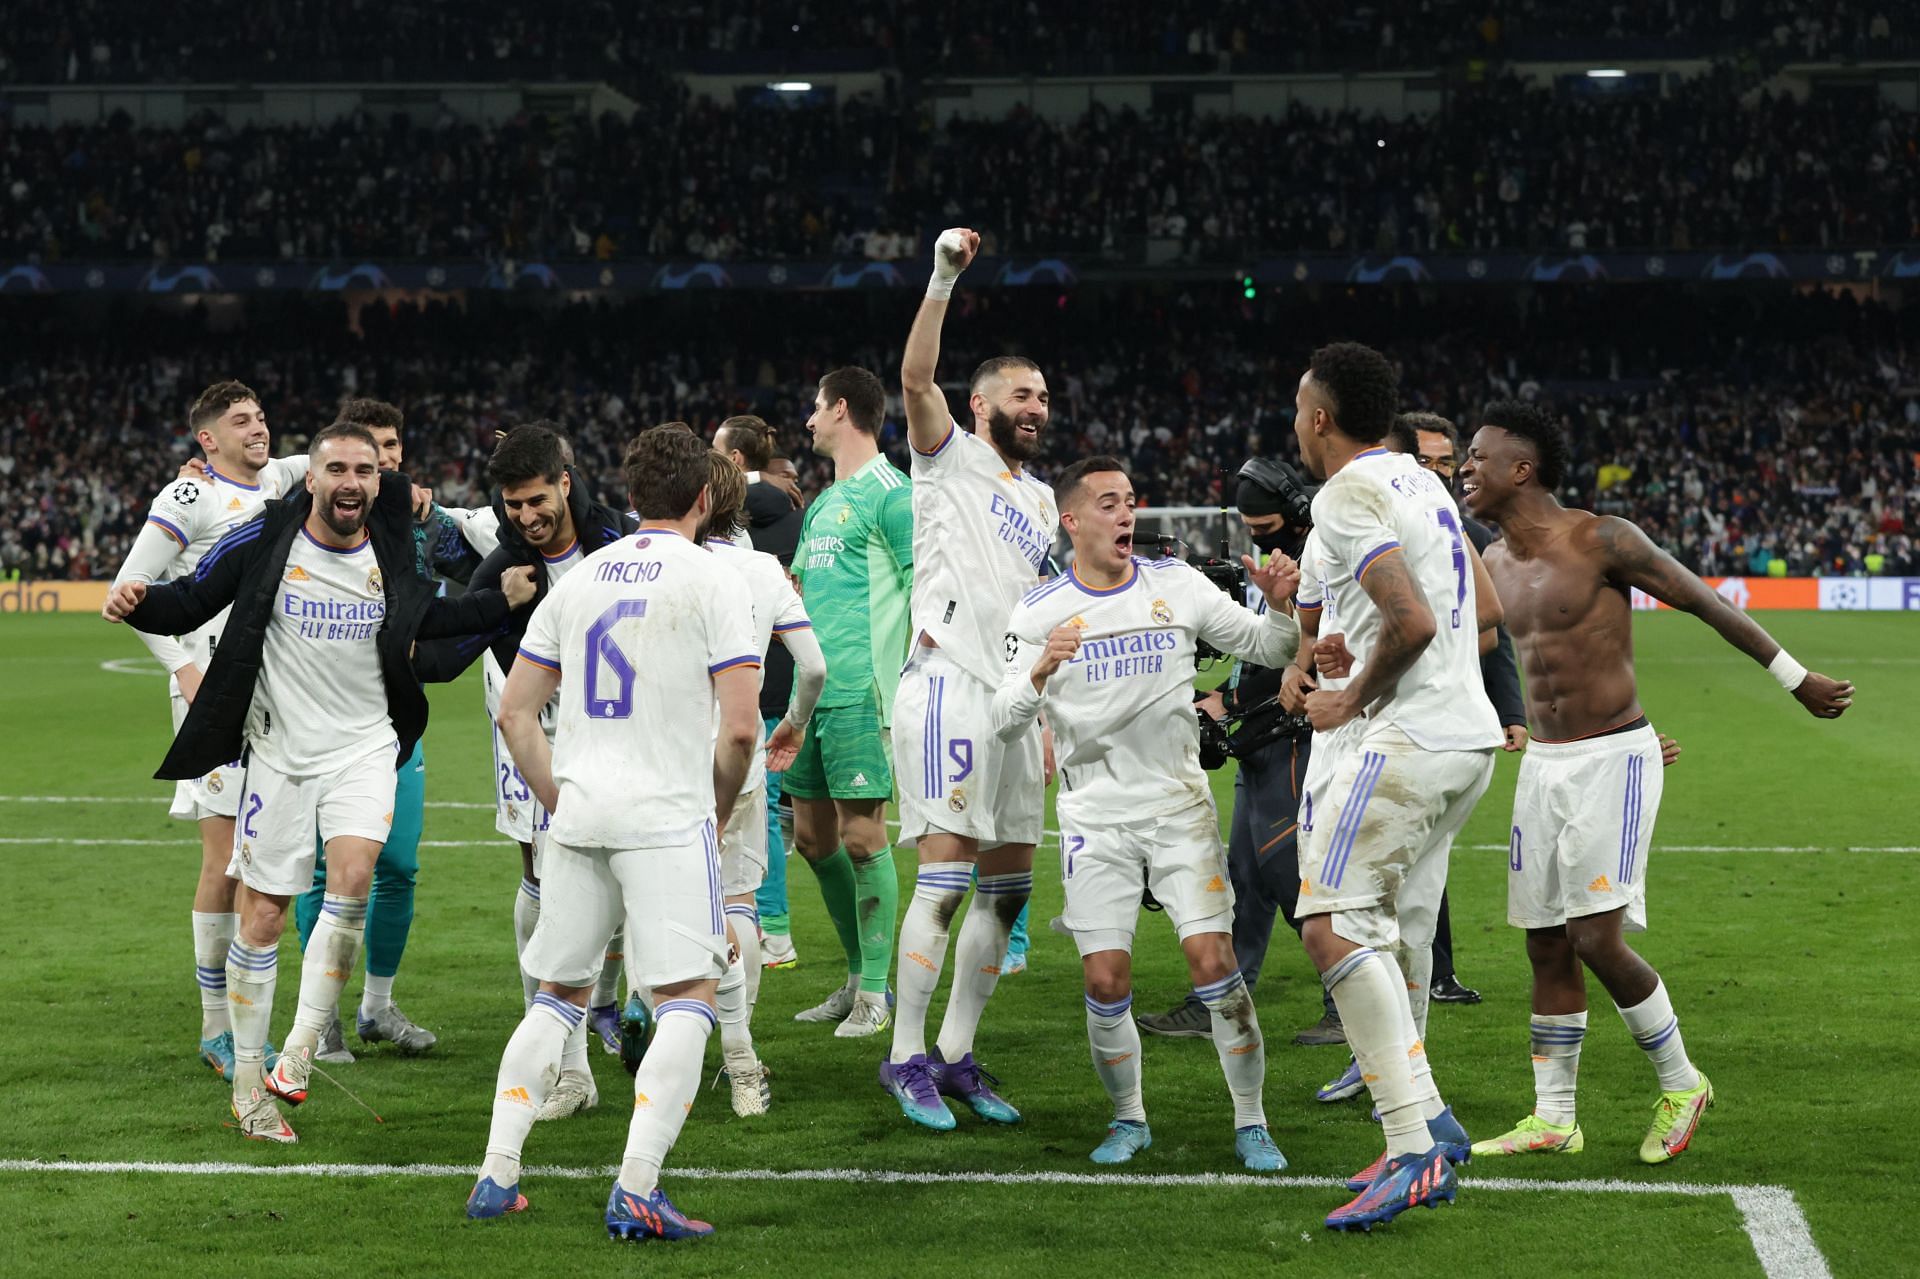 Real Madrid celebraed in style after successfully knocking out PSG from the Champions League